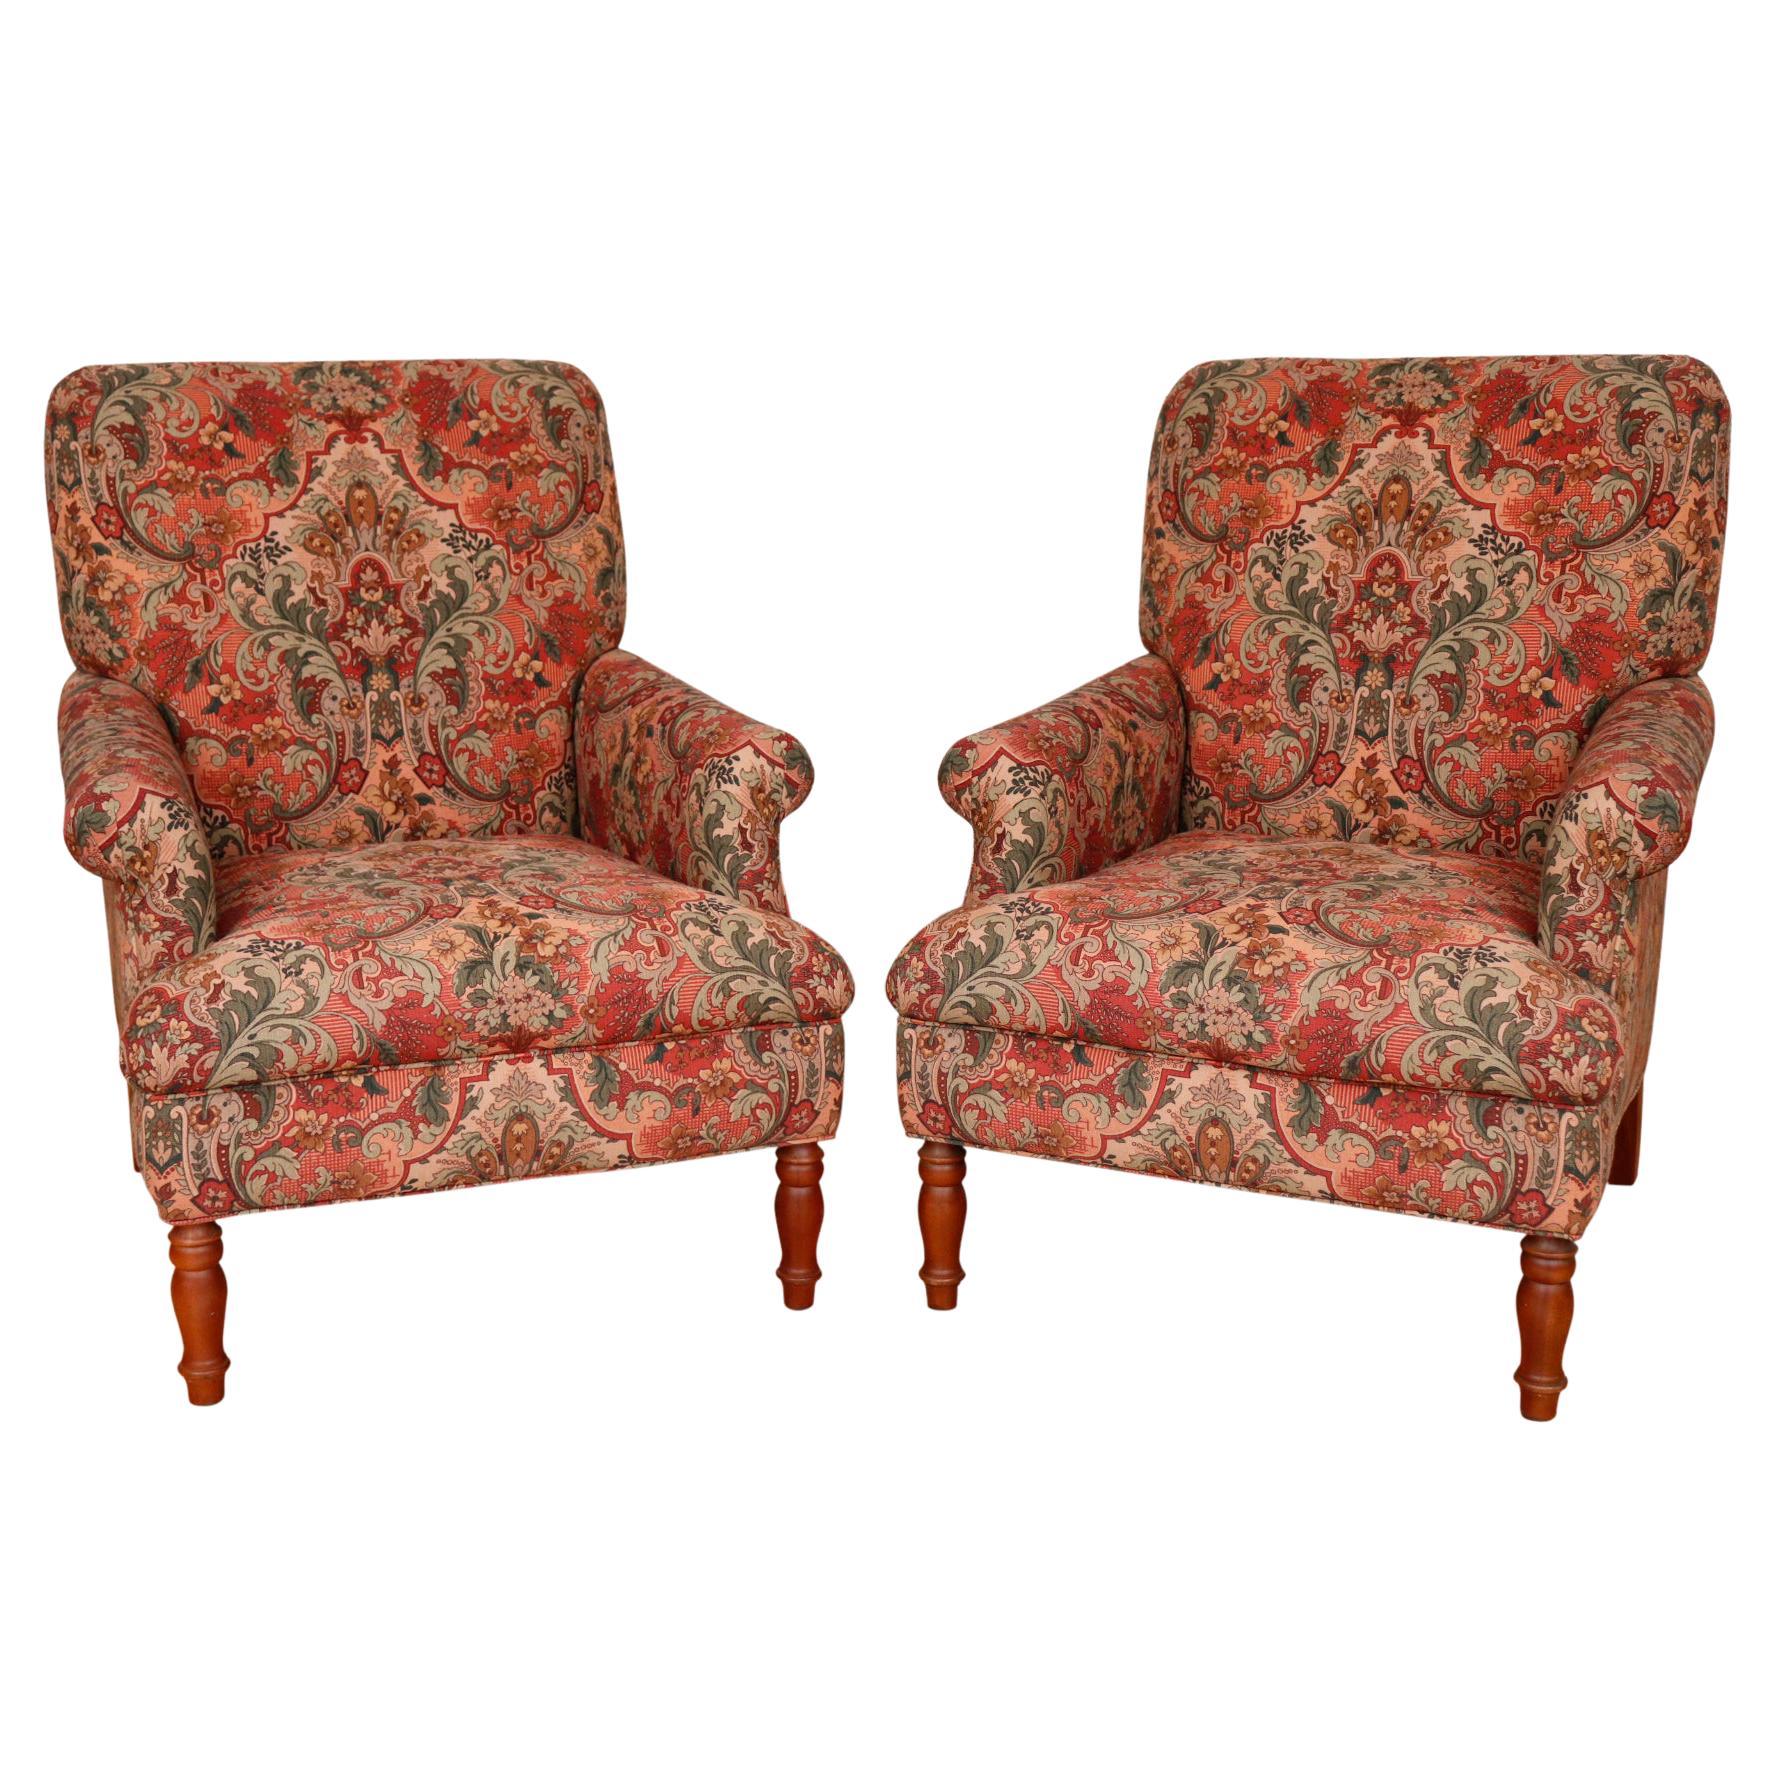 Pair of Floral English Style Lounge Chairs